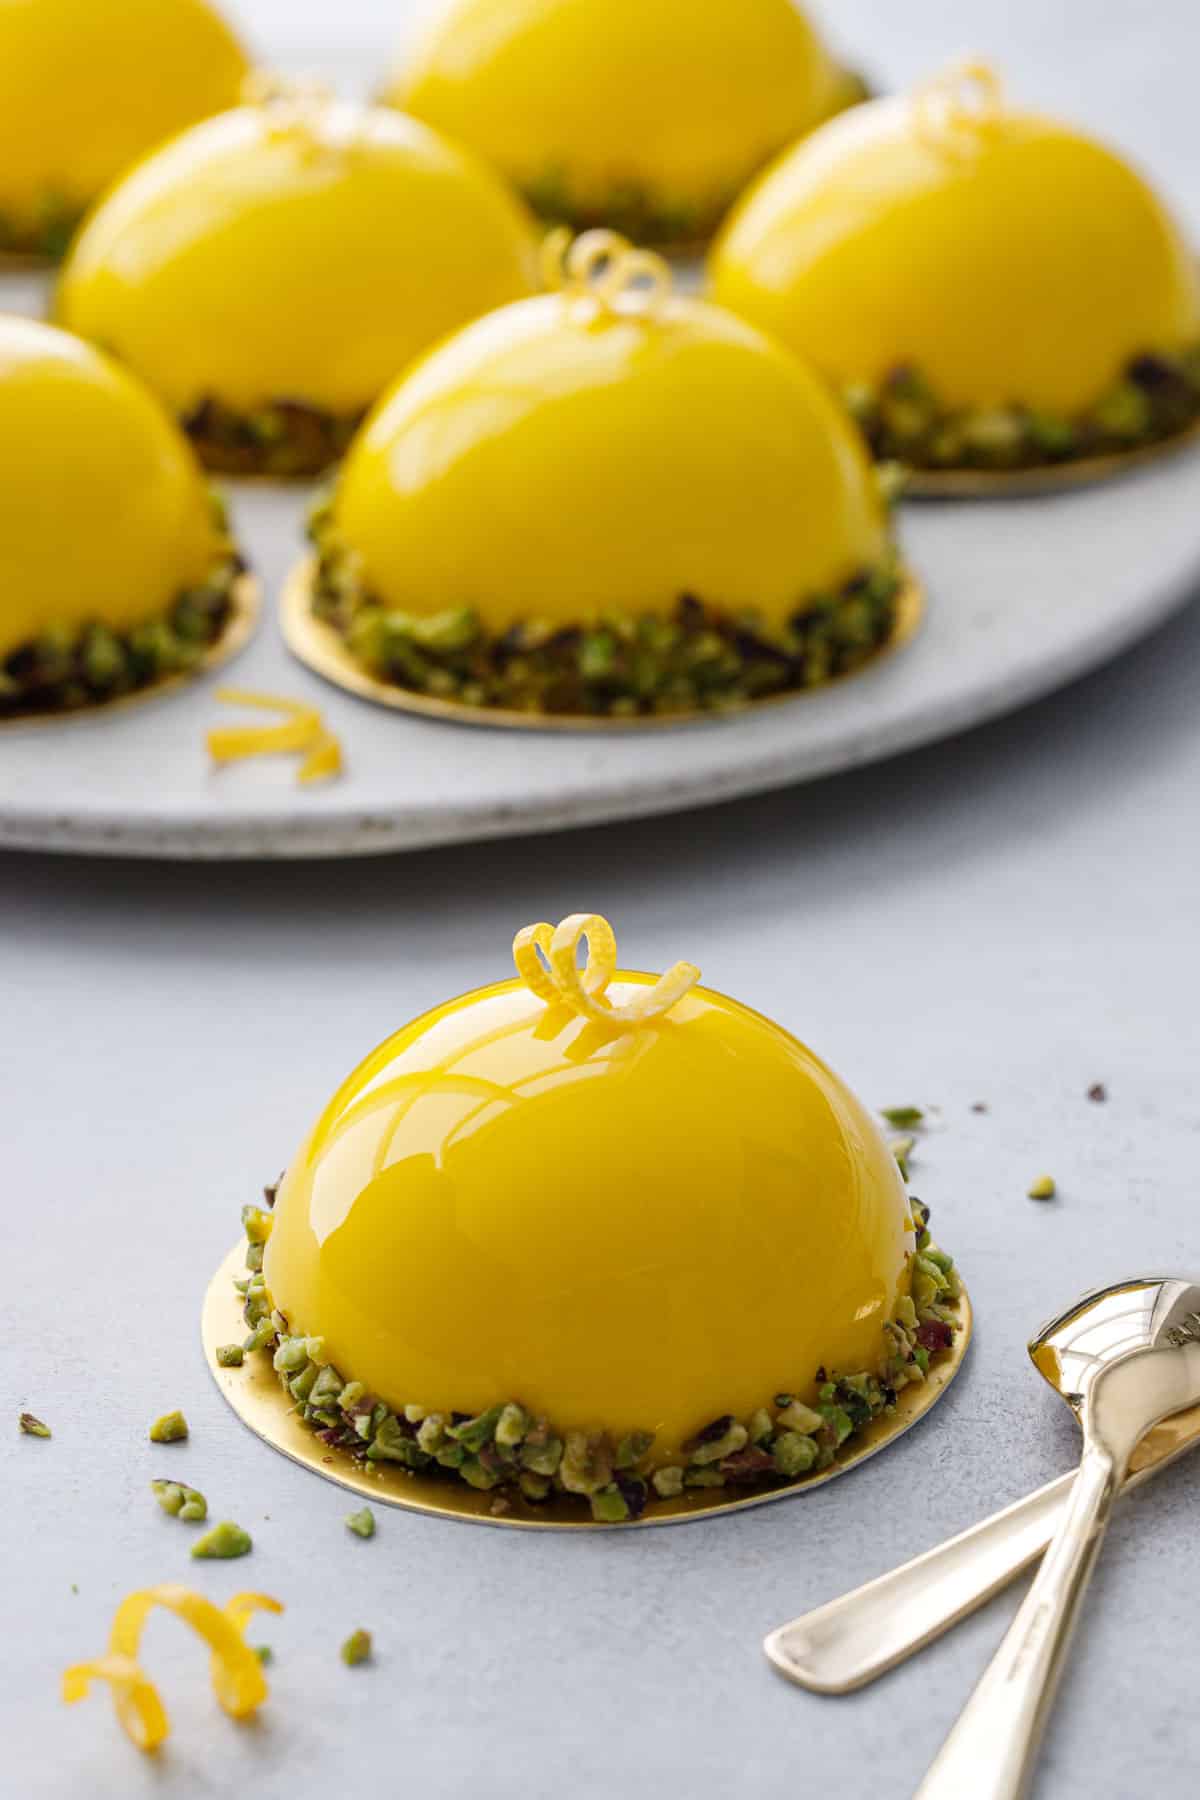 Bright yellow mirror-glazed dome shaped mousse cakes with pistachios around the edges, one cake in front and a plate of more in the background.